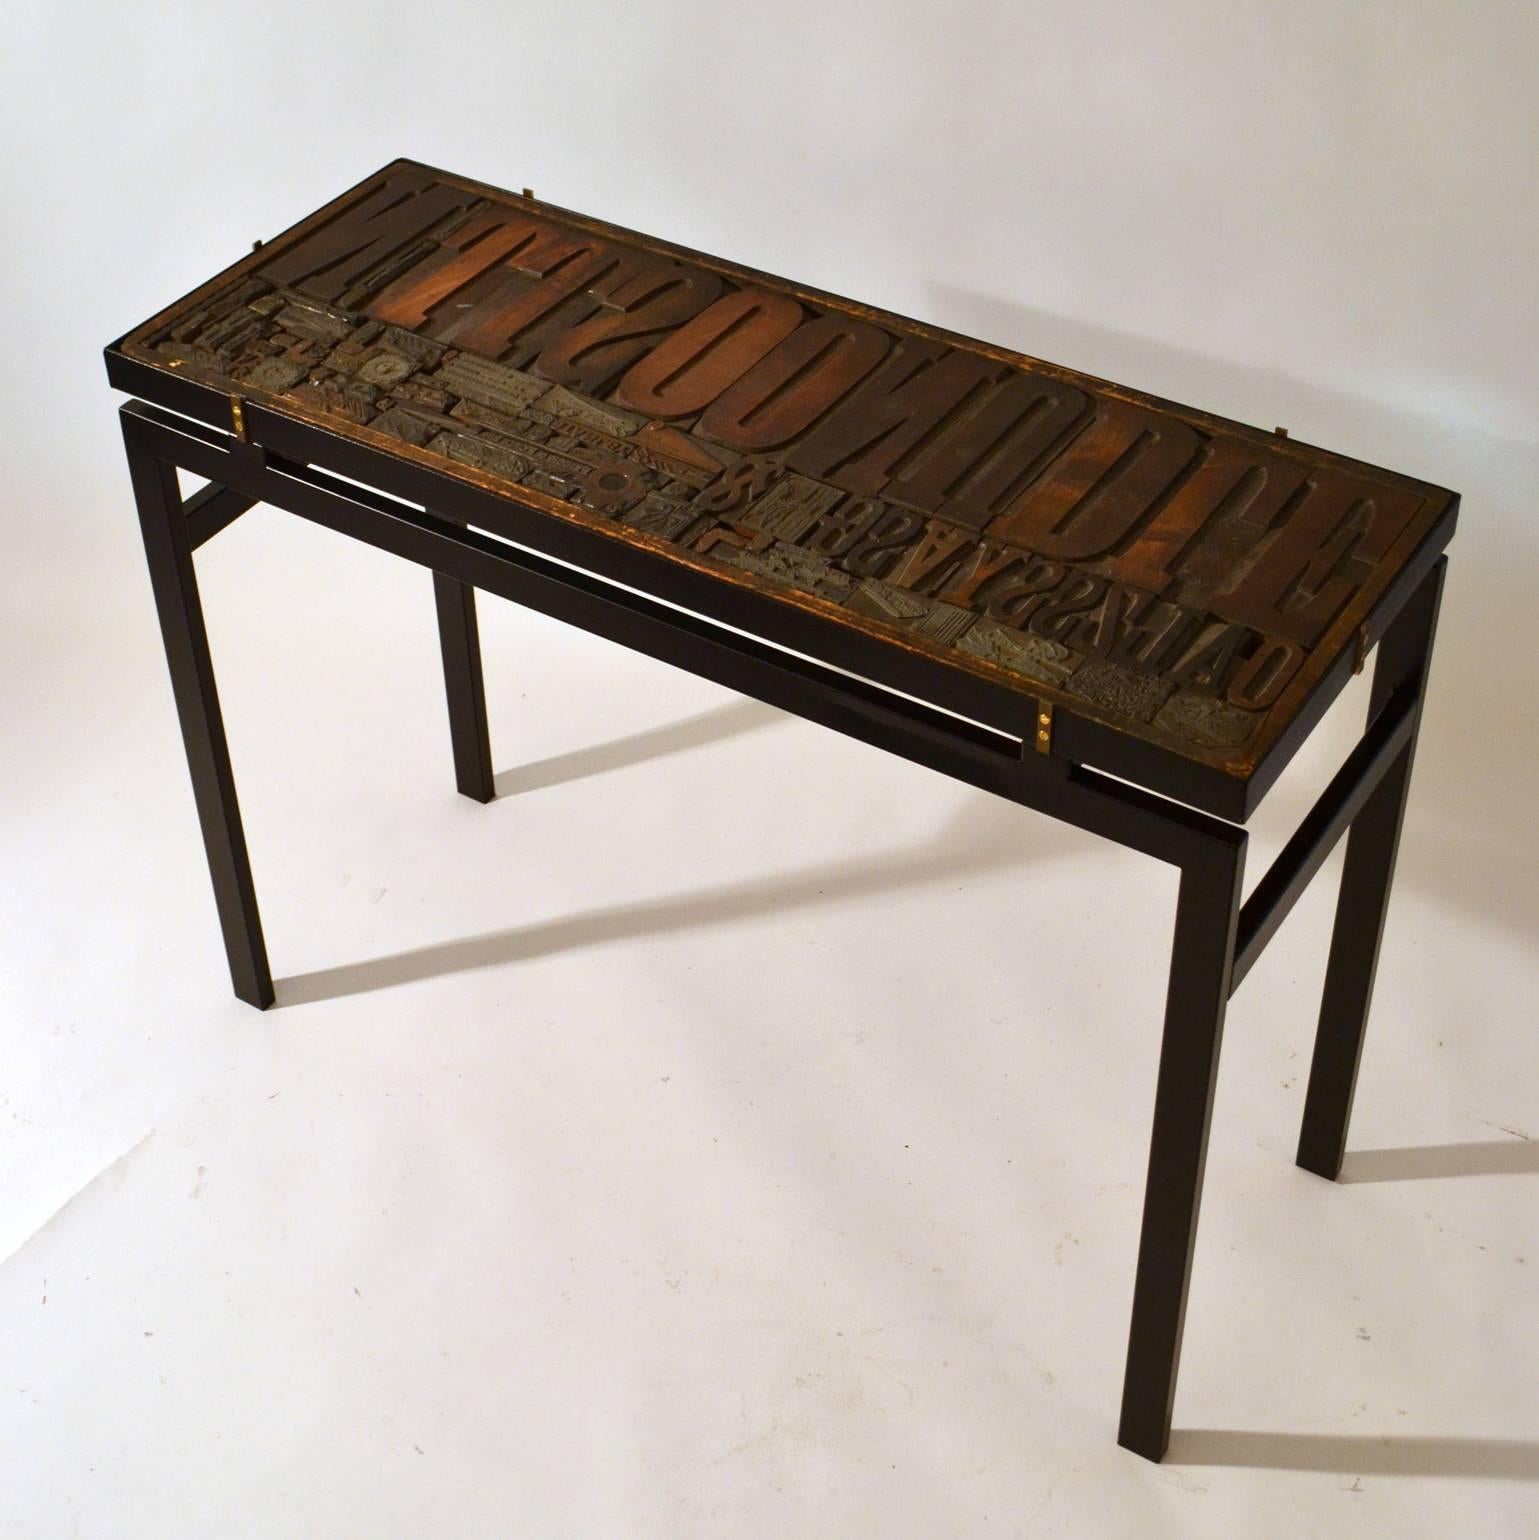 Contemporary Console / Desk with Early 20th Century Printing Blocks Top on Black Metal Frame